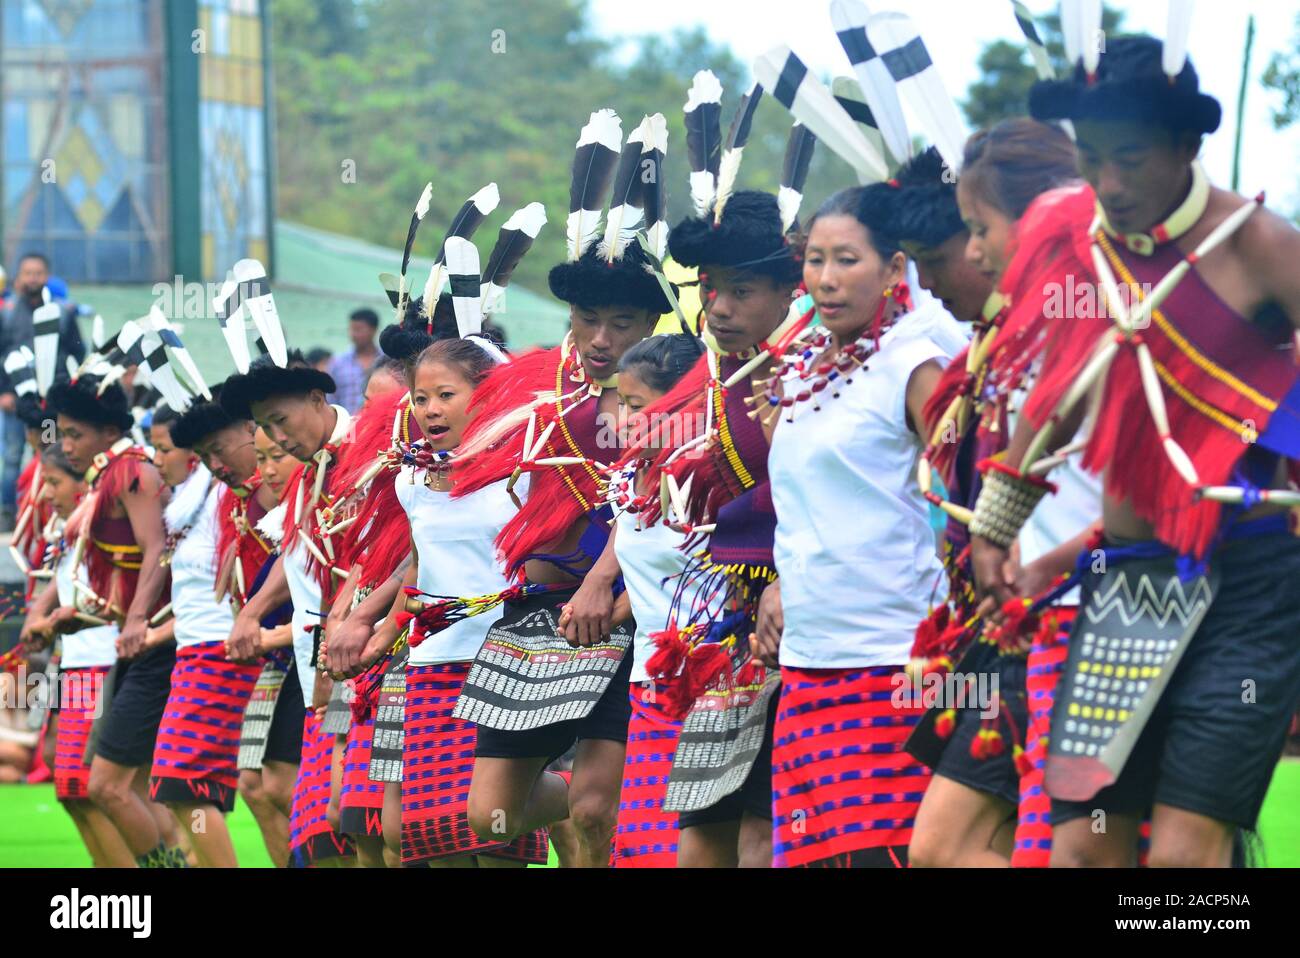 Kohima, India. 03 Dec 2019: Ao tribesmen perform a dance on the third day of the State annual Hornbill festival at Naga Heritage Village Kisama, some 15 kms away from Kohima, the capital city of the India north eastern state of Nagaland. The annual Hornbill festival of Nagaland celebrates the cultural heritage of the Nagas. Credit: Caisii Mao/Alamy Live News Stock Photo